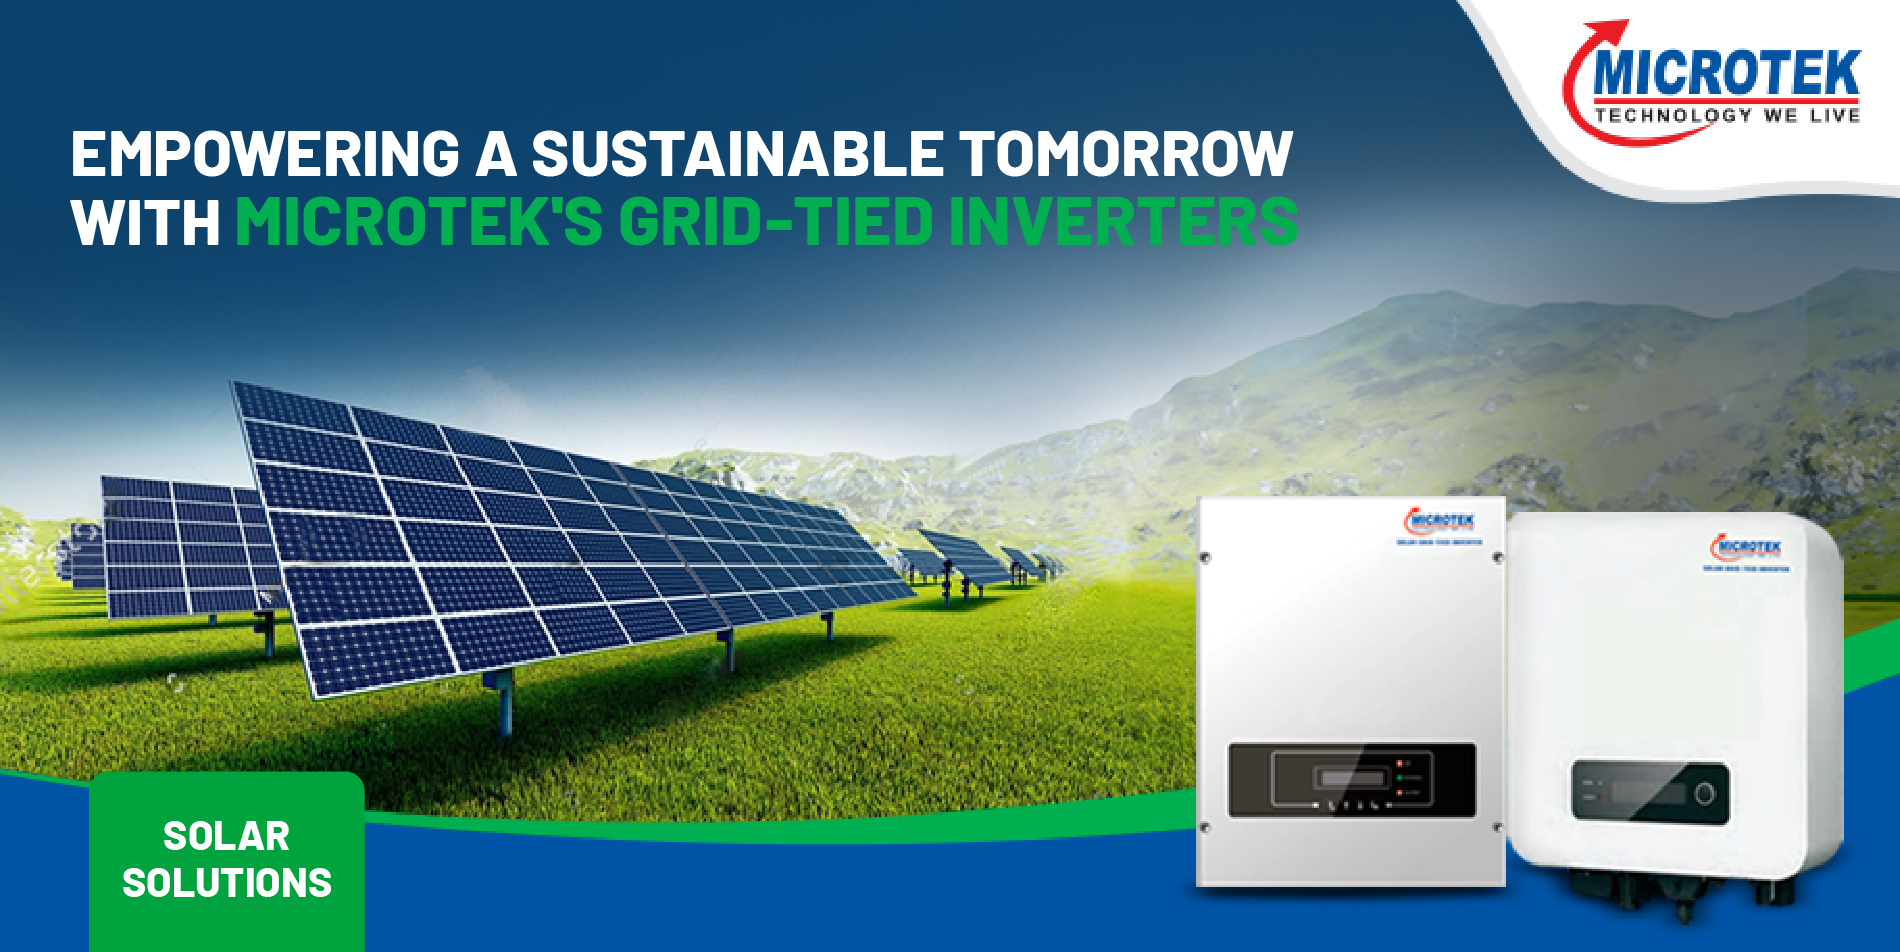 Empowering a Sustainable Tomorrow with Microtek’s Grid-Tied Inverters